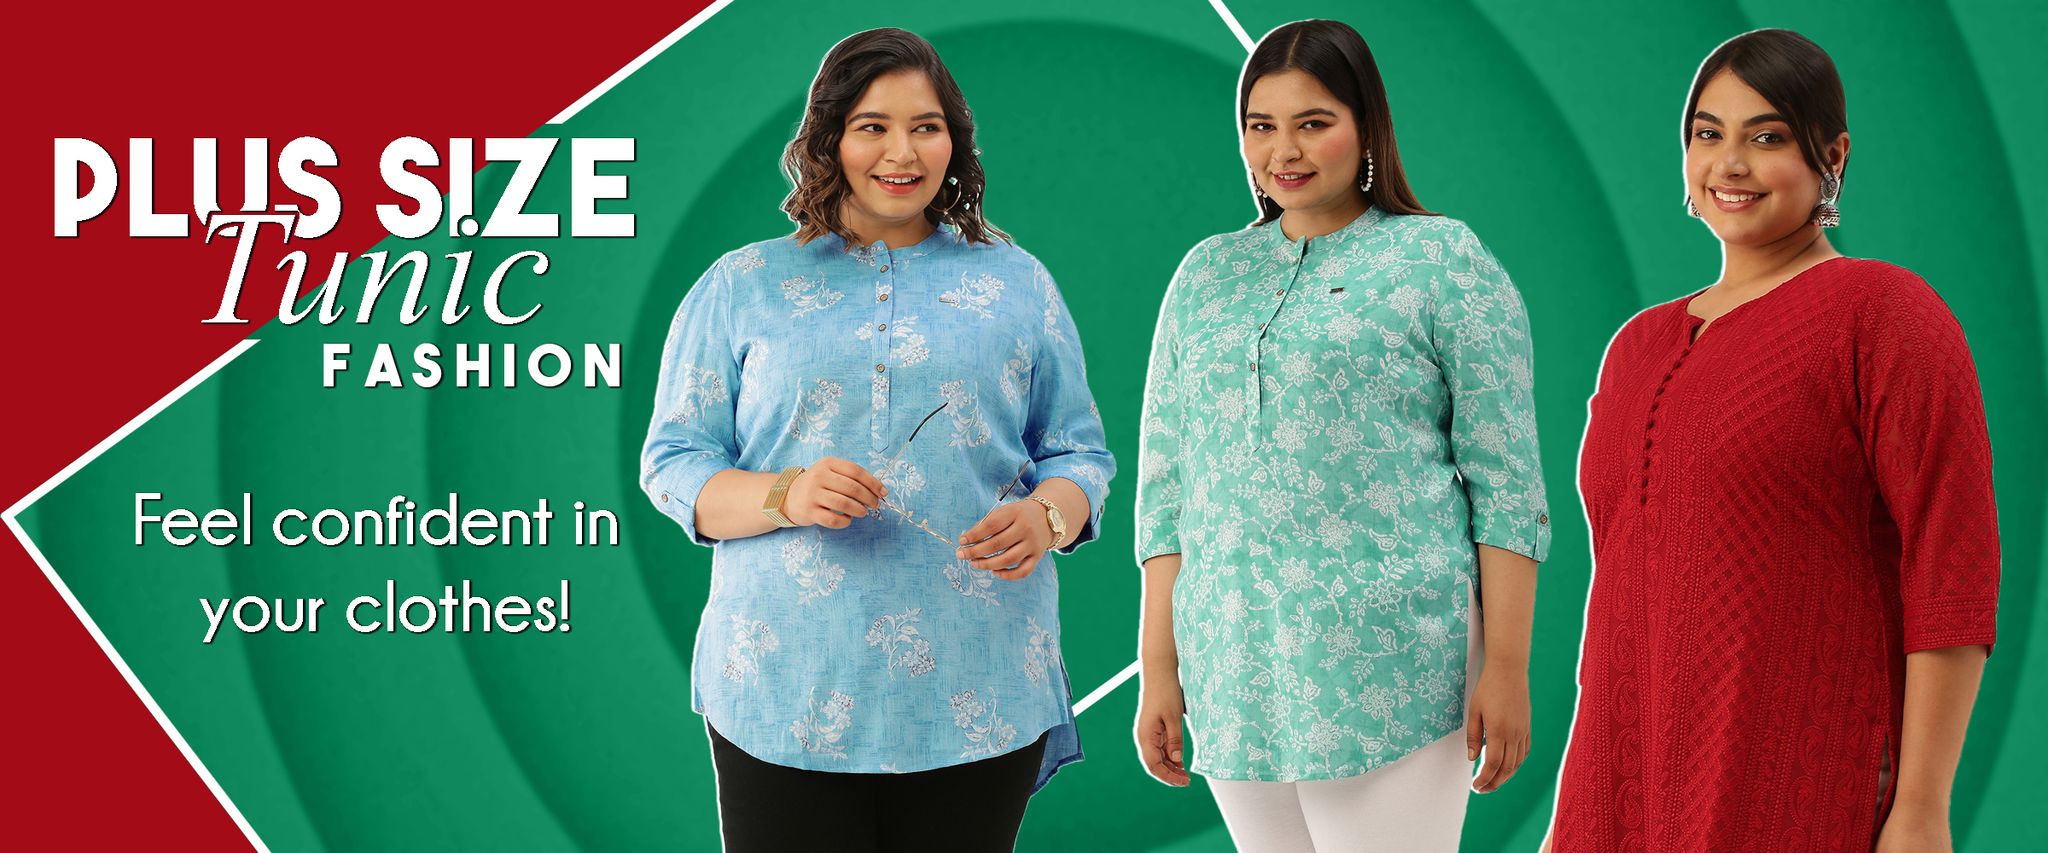 Curve Confidence: Plus Size Tunics for Women with Style!